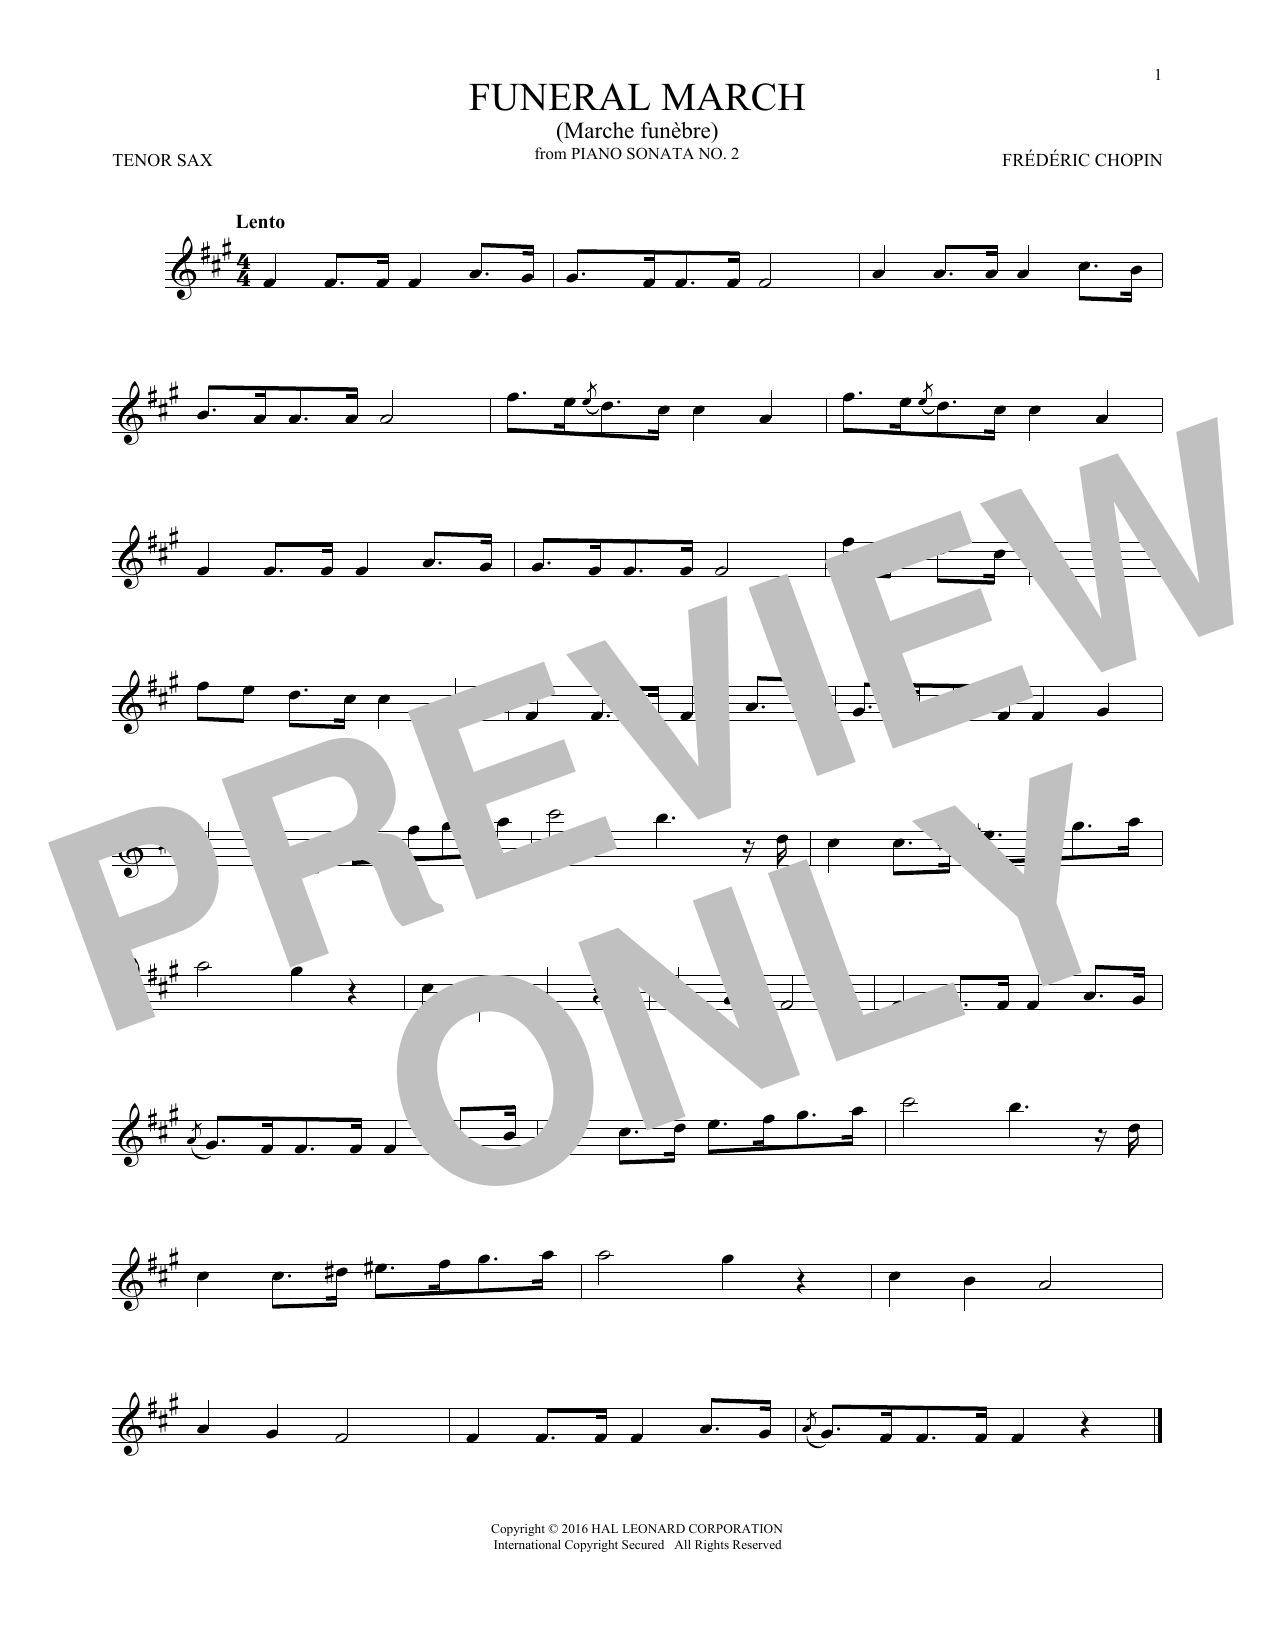 Download Frederic Chopin Funeral March Sheet Music